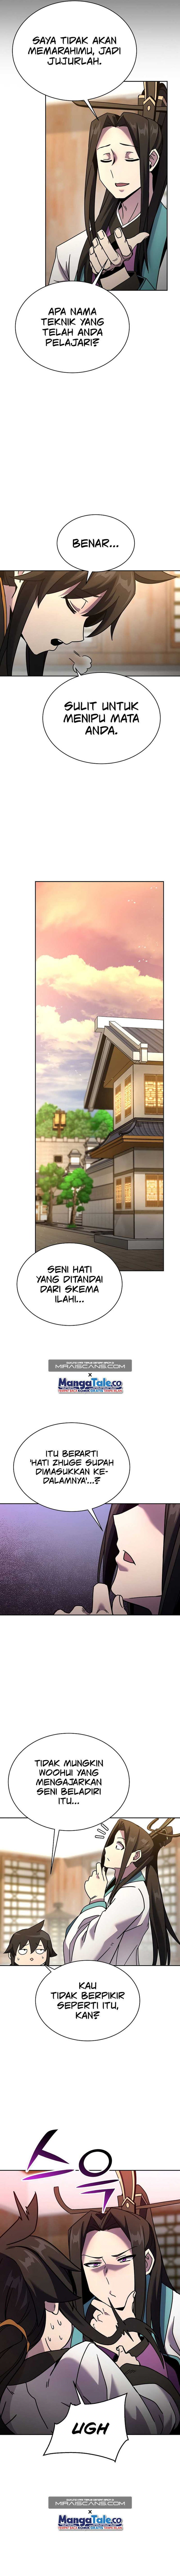 Martial Streamer Chapter 06